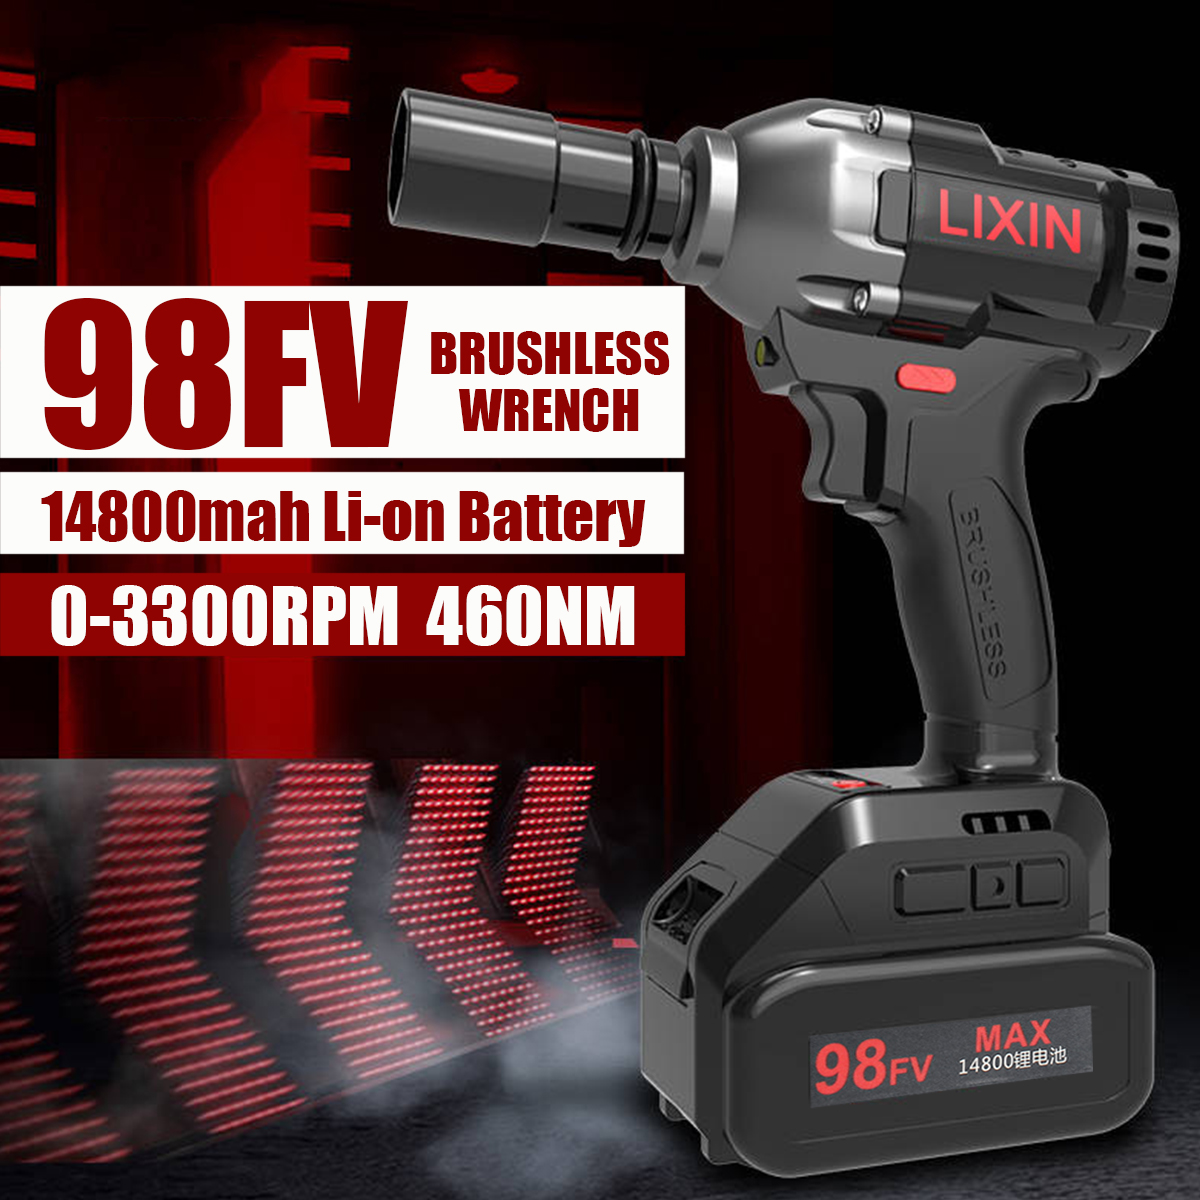 98FV 14800mAh Cordless Brushless Electric Wrench Drill LED Light W/ 1 or 2 Li-on Battery 13